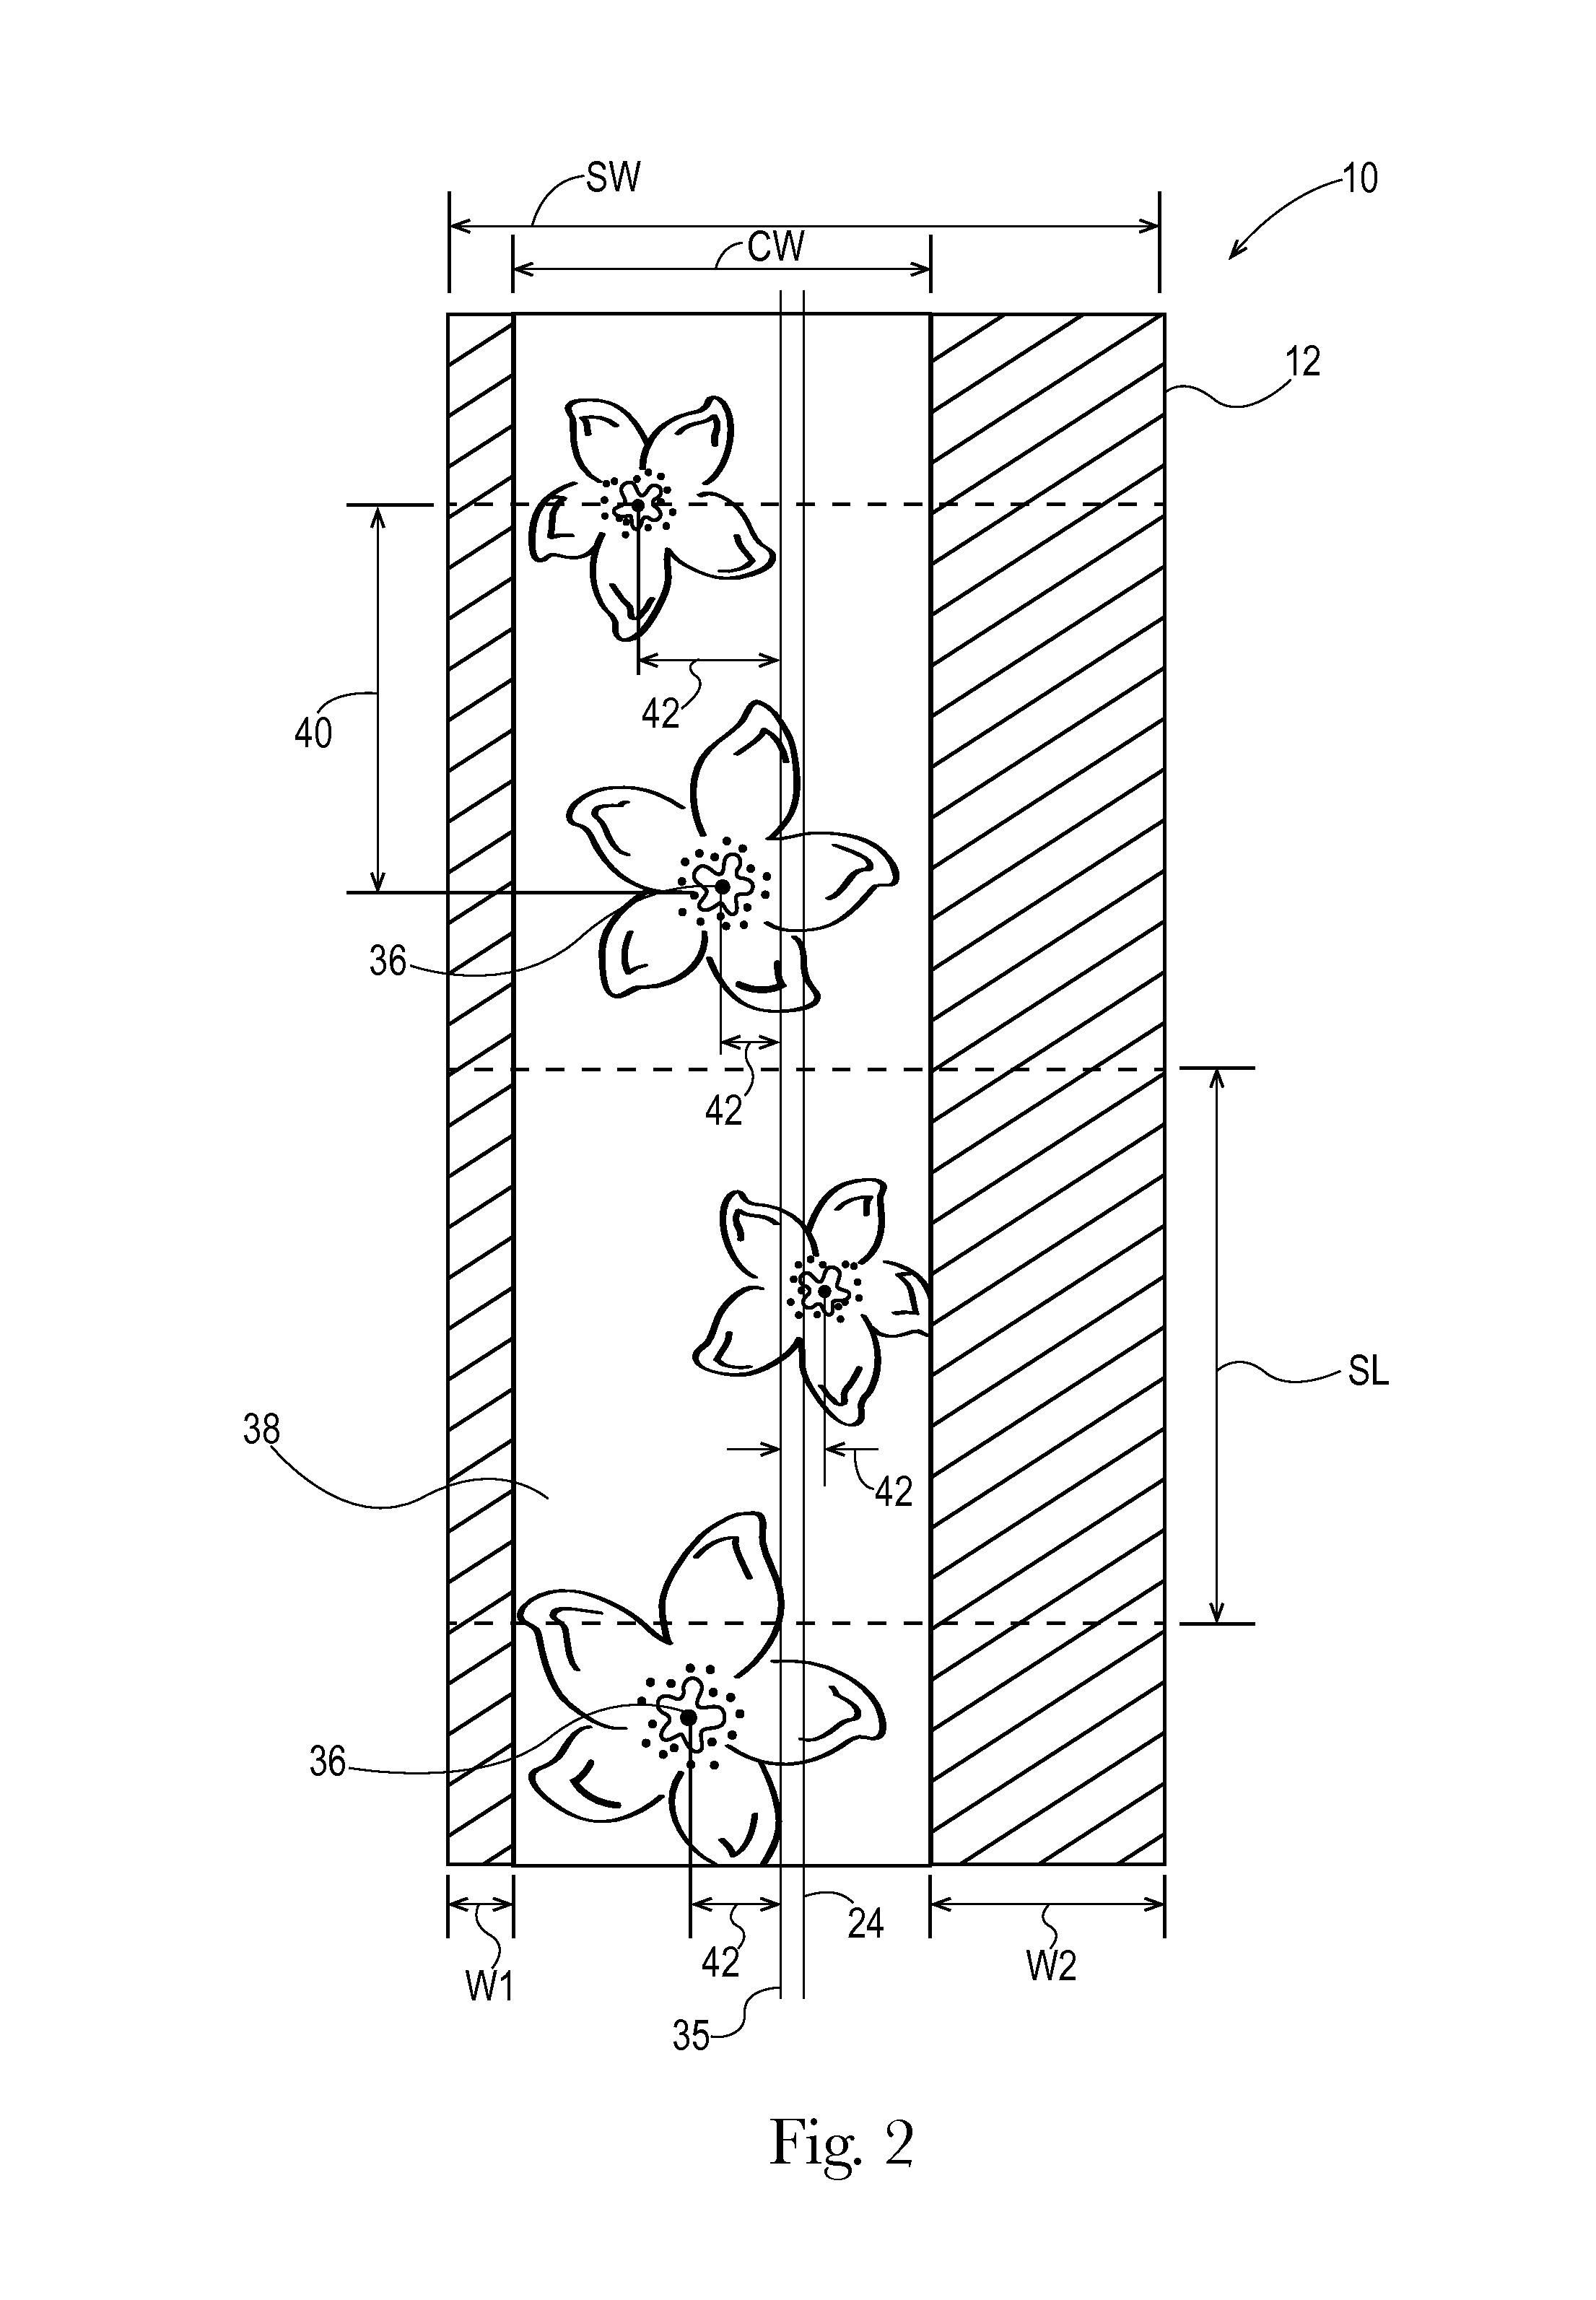 Method for producing an absorbent paper product having visual elements